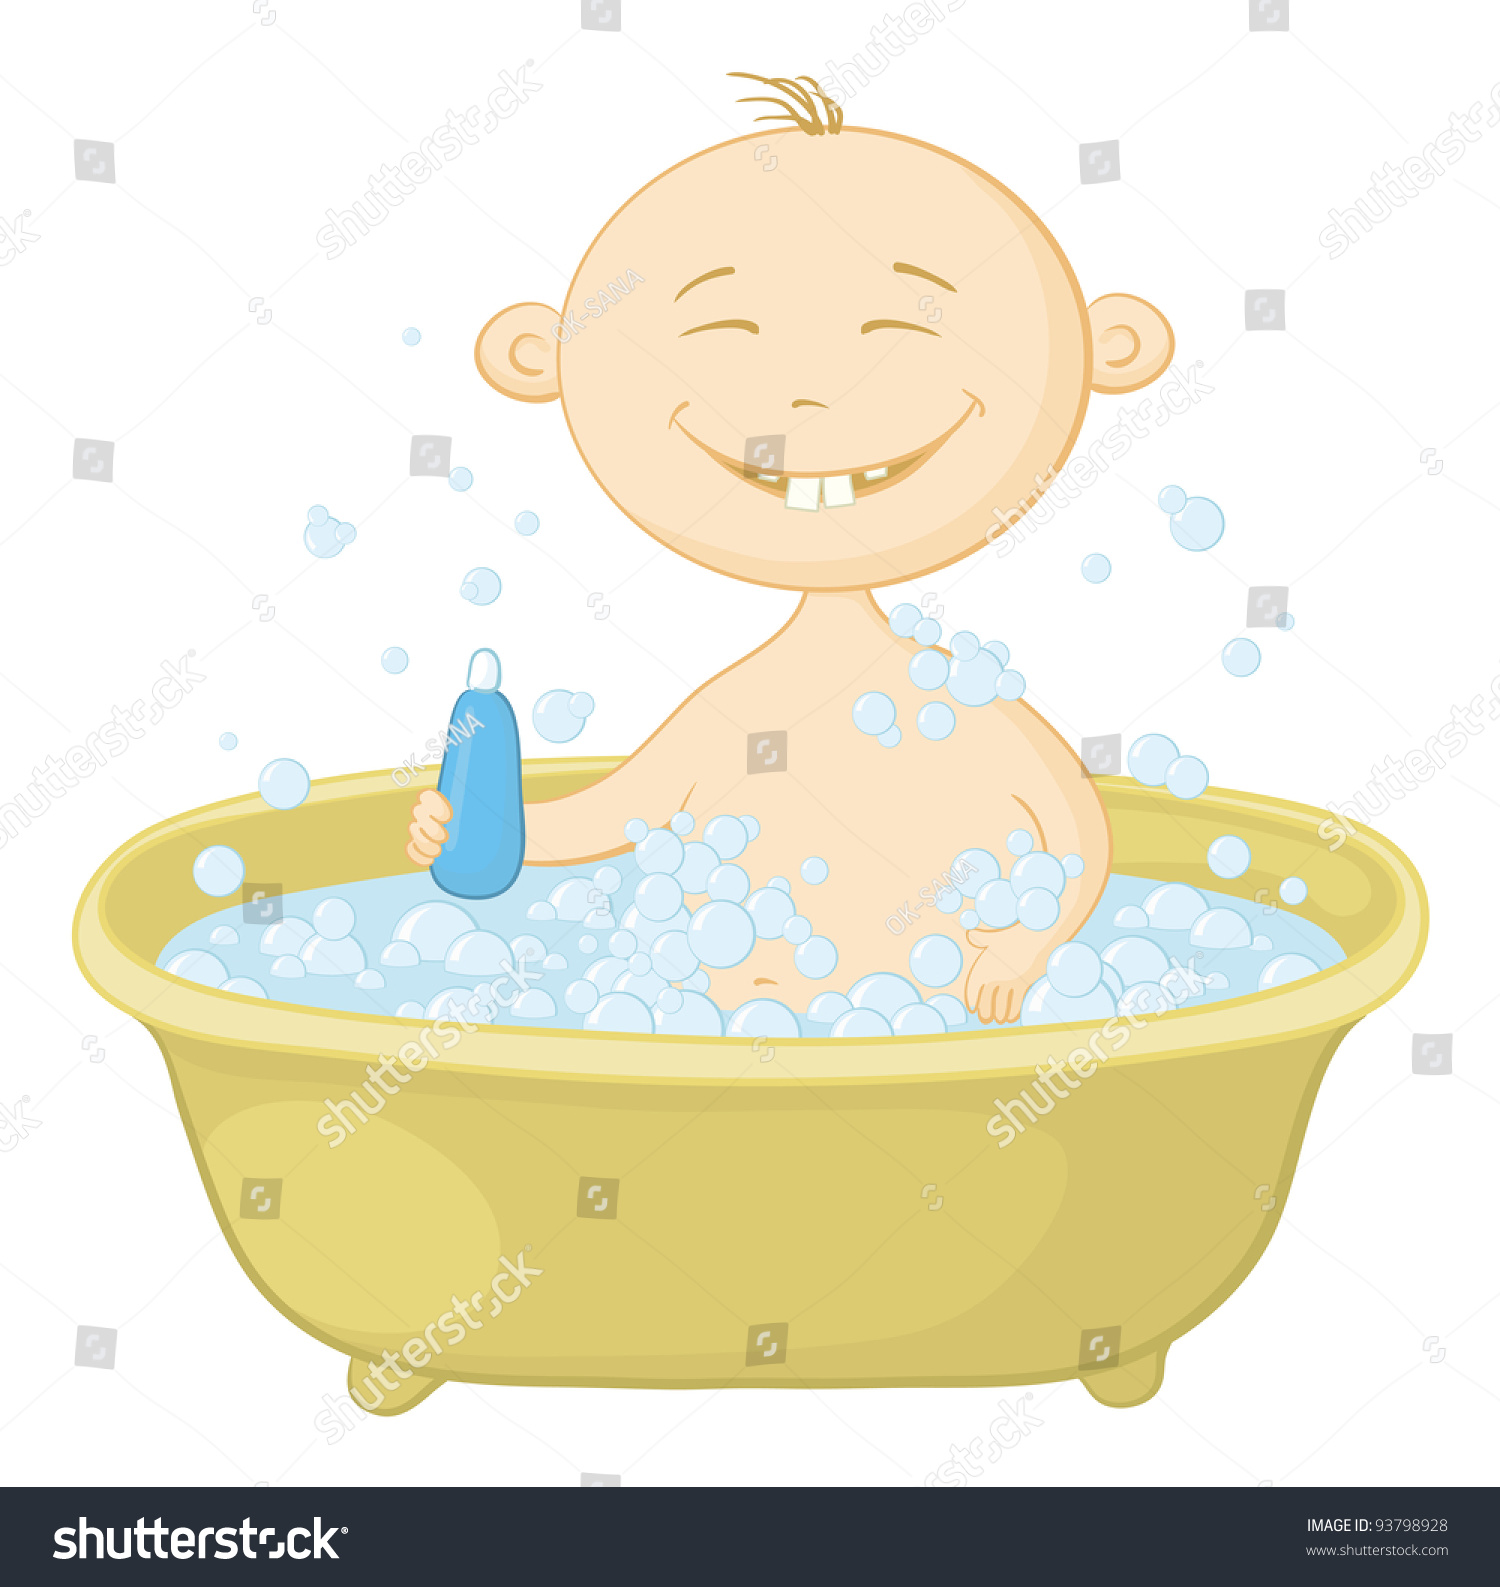 Cartoon, Cheerful Smiling Child Sitting In A Bath With Soap And Holding ...